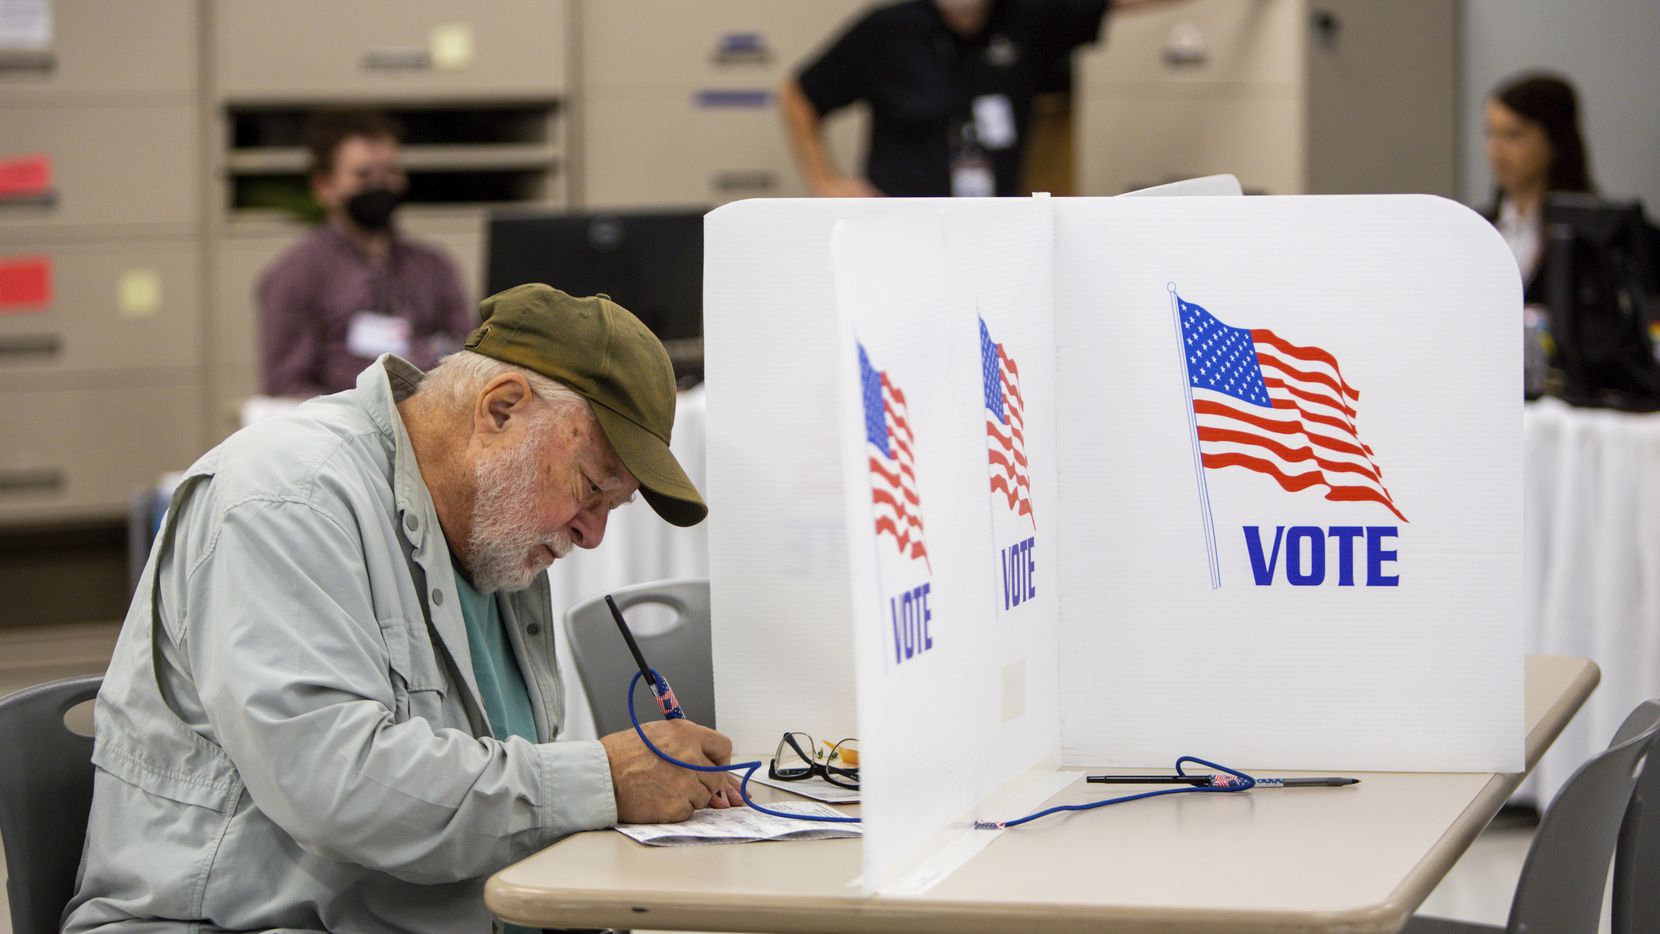 Voters cast their ballots on Friday, Sept. 23, 2022, in Minneapolis. With Election Day still more than six weeks off, the first votes of the midterm election were already being cast Friday in a smattering of states including Minnesota.